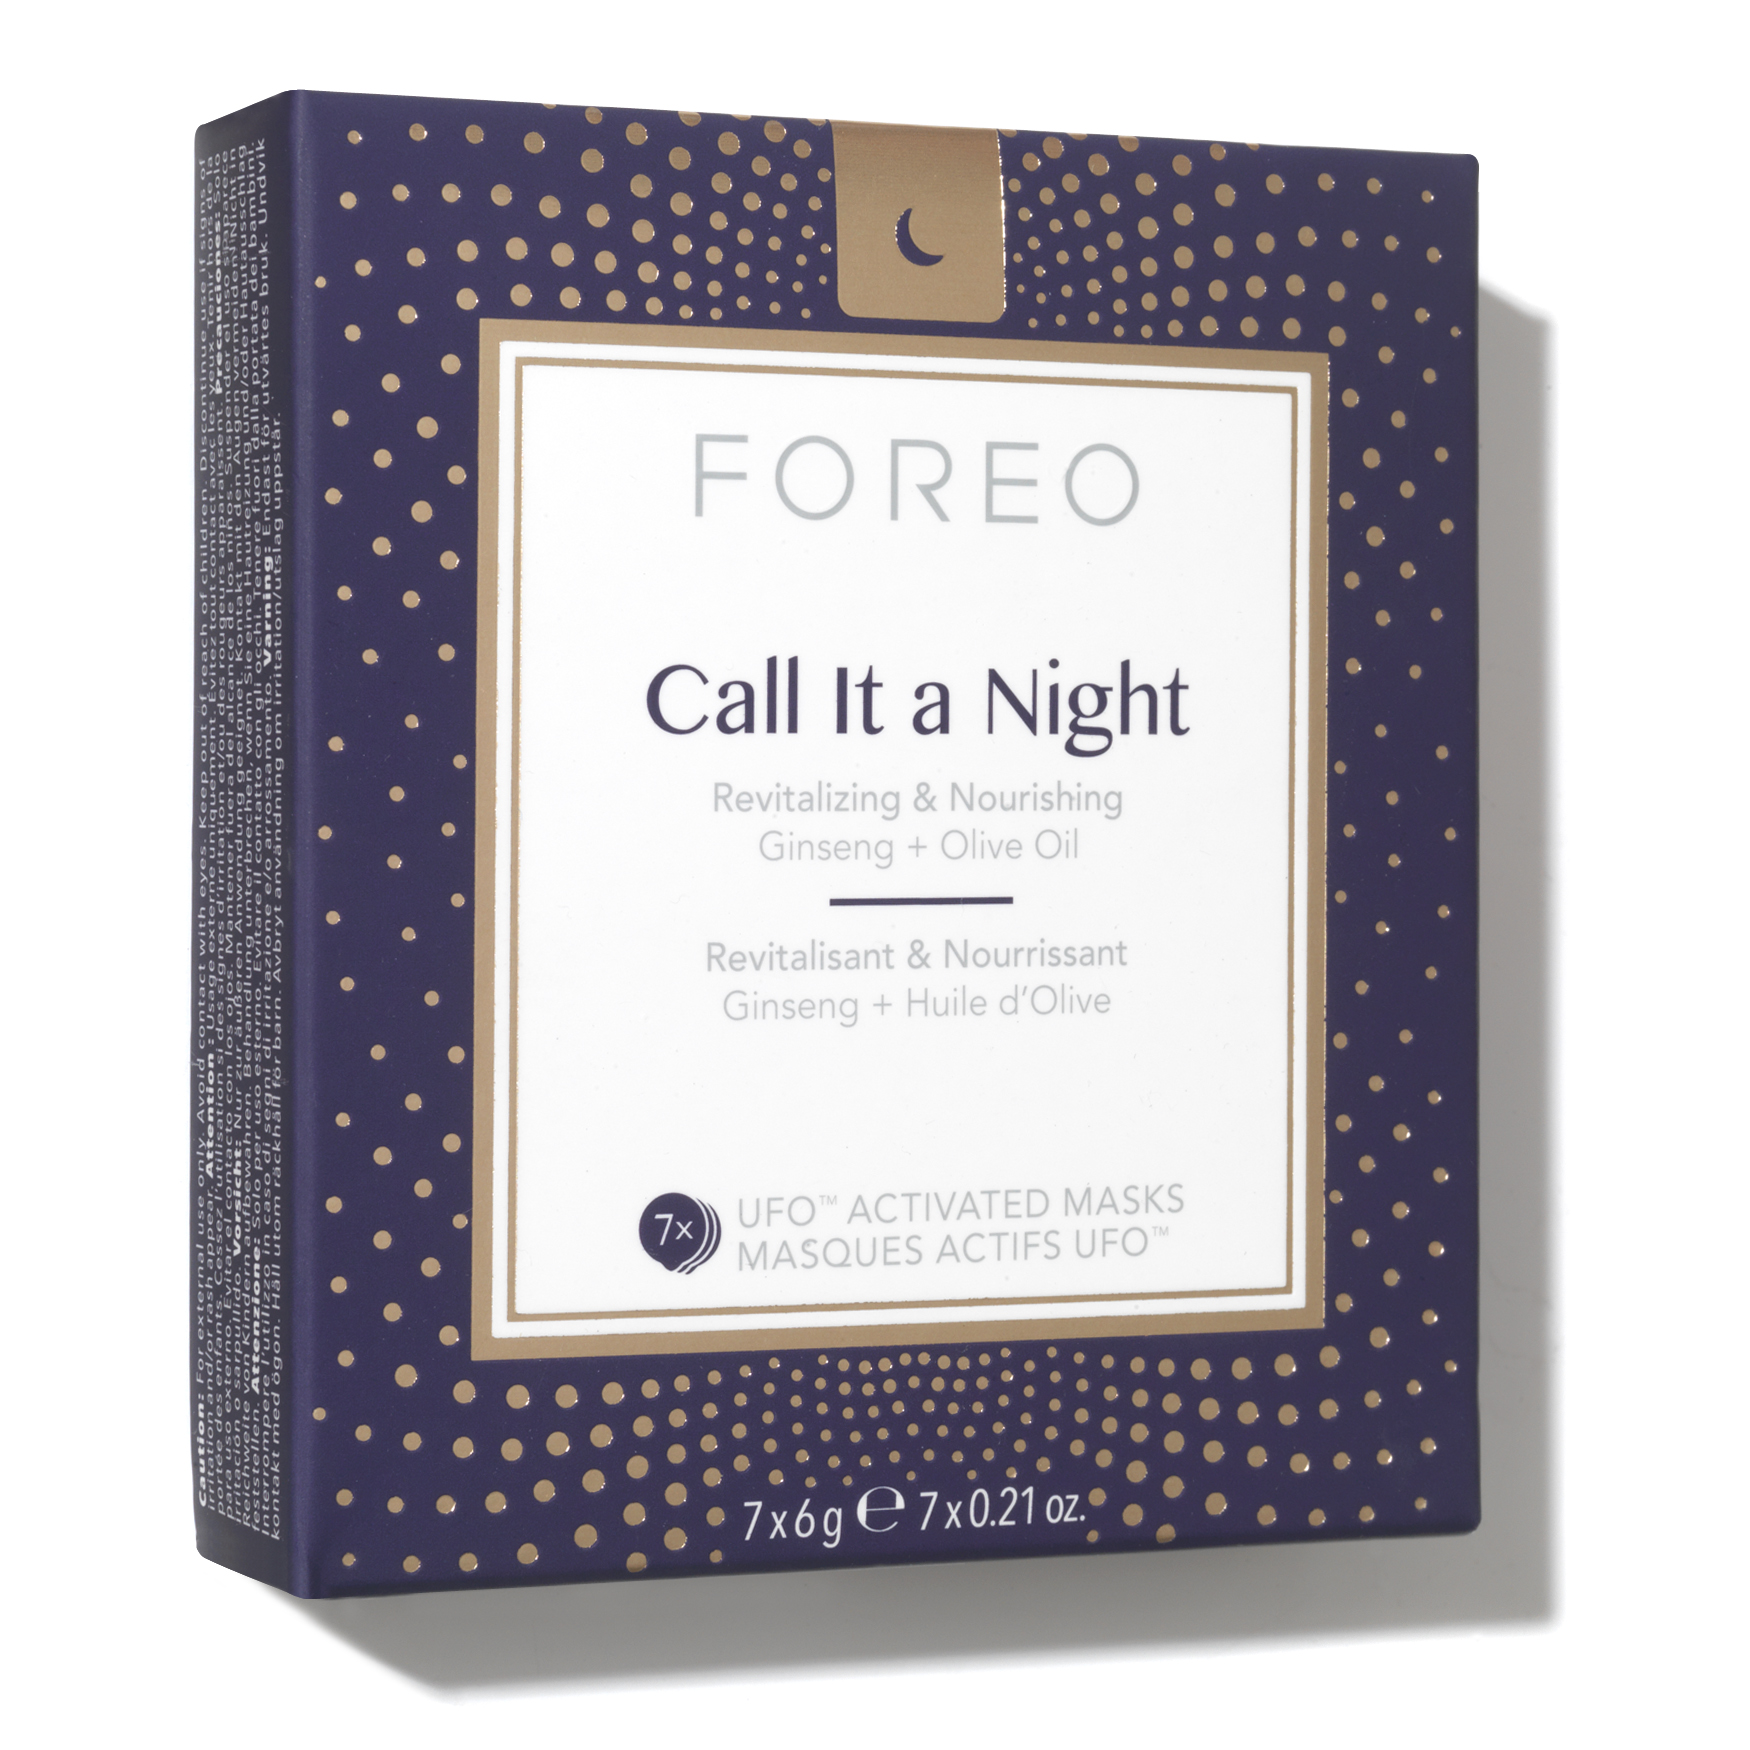 Foreo Call It a Night UFO-Activated Masks | Space NK